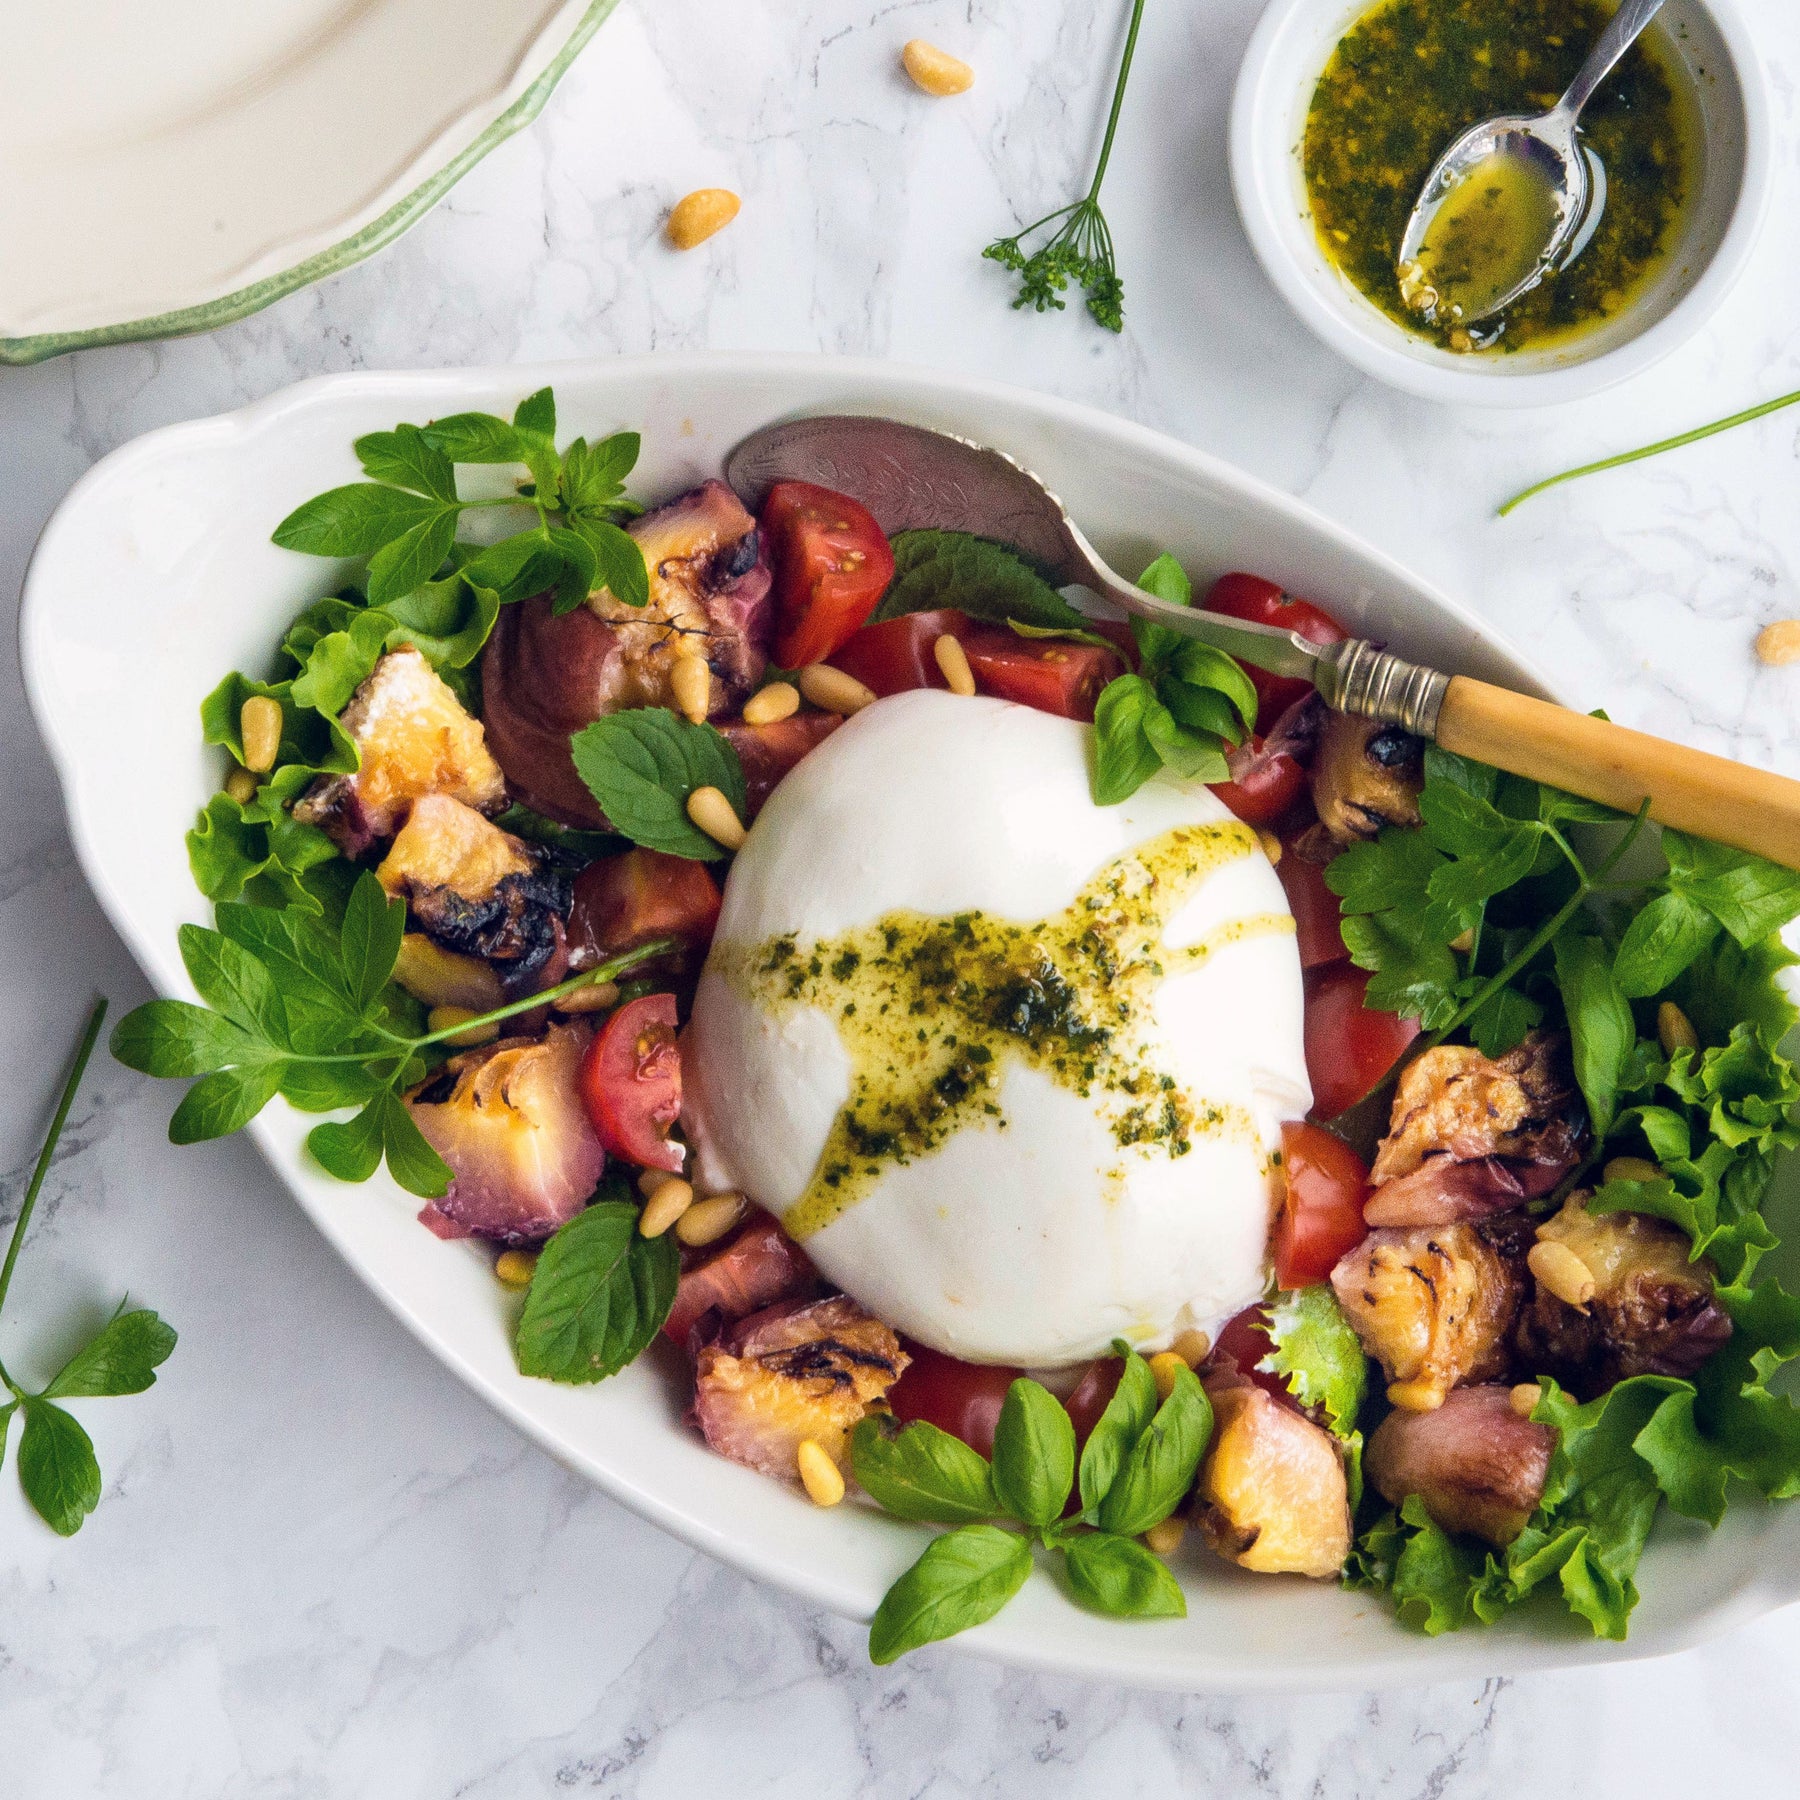 BURRATA DI ANDRIA IGP - FROM PUGLIA TO THE KITCHENS OF THE GREAT CHEFS